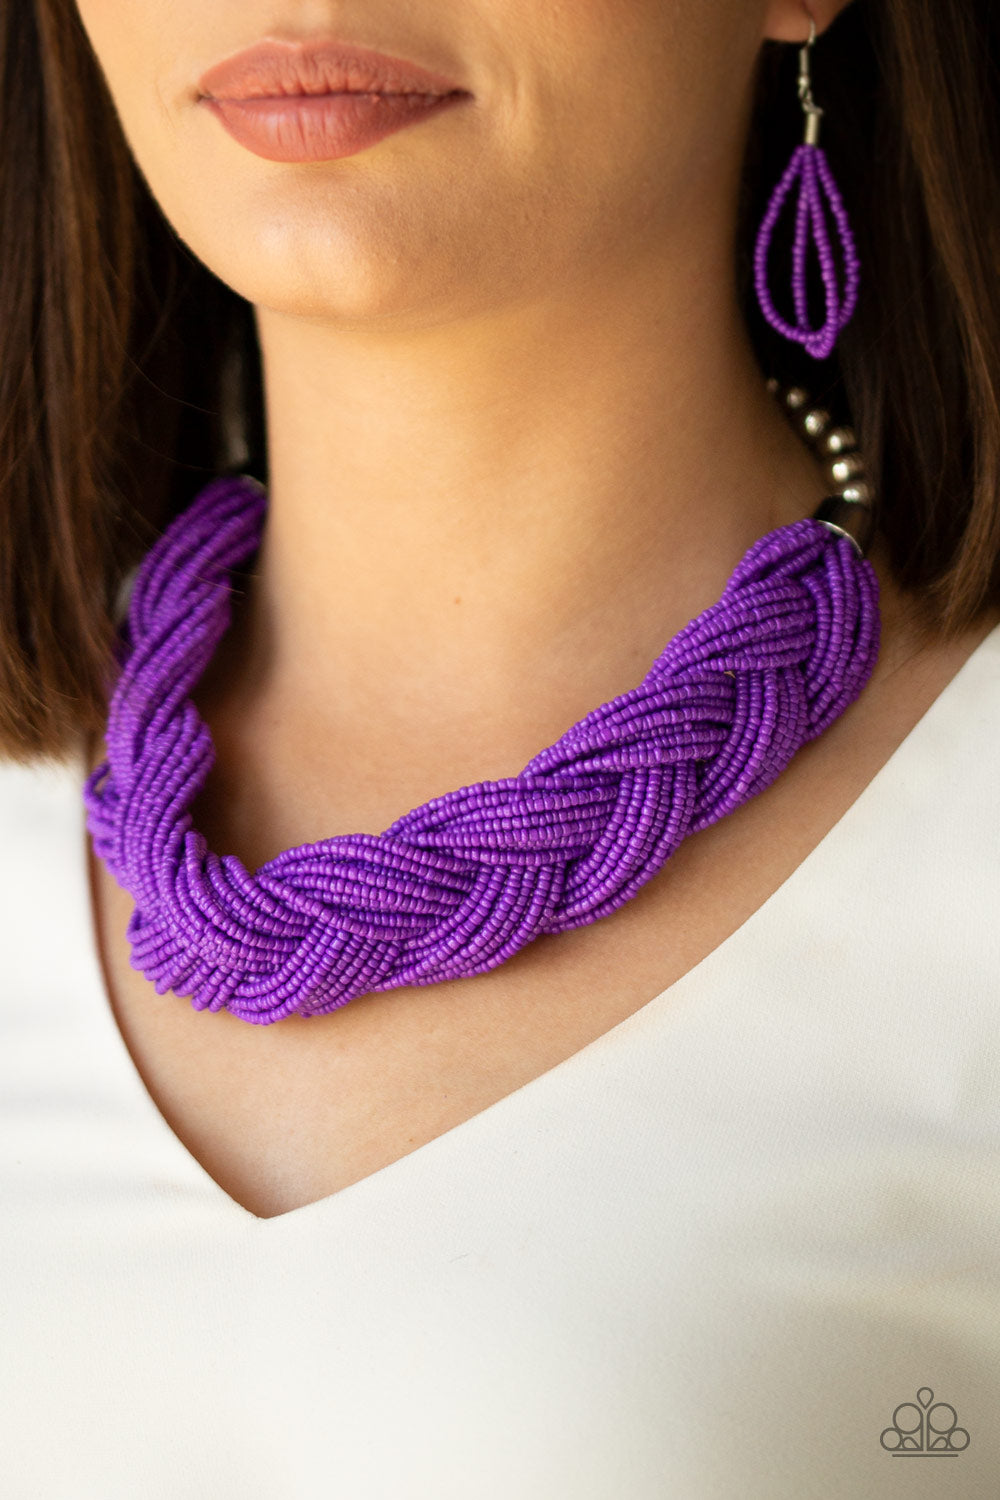 The Great Outback Purple Seed Bead Necklace - Paparazzi Accessories